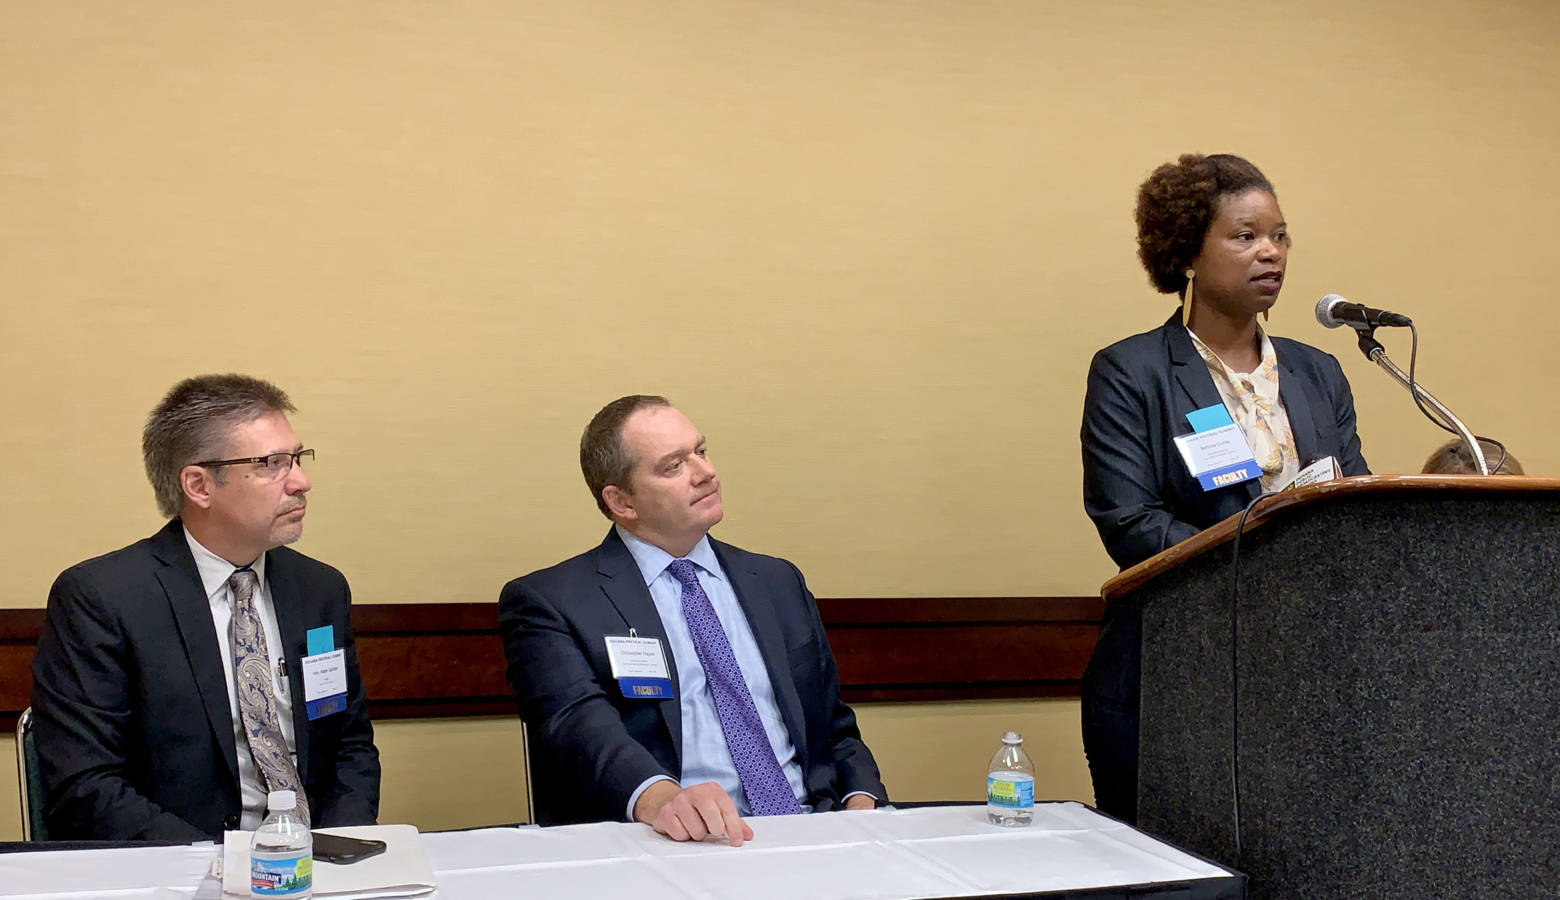 From left, Grant County Judge Mark Spitzer, Indiana Prosecuting Attorneys Council Executive Director Chris Naylor, and Indiana Public Defender Council Executive Director Bernice Corley. (Brandon Smith/IPB News)